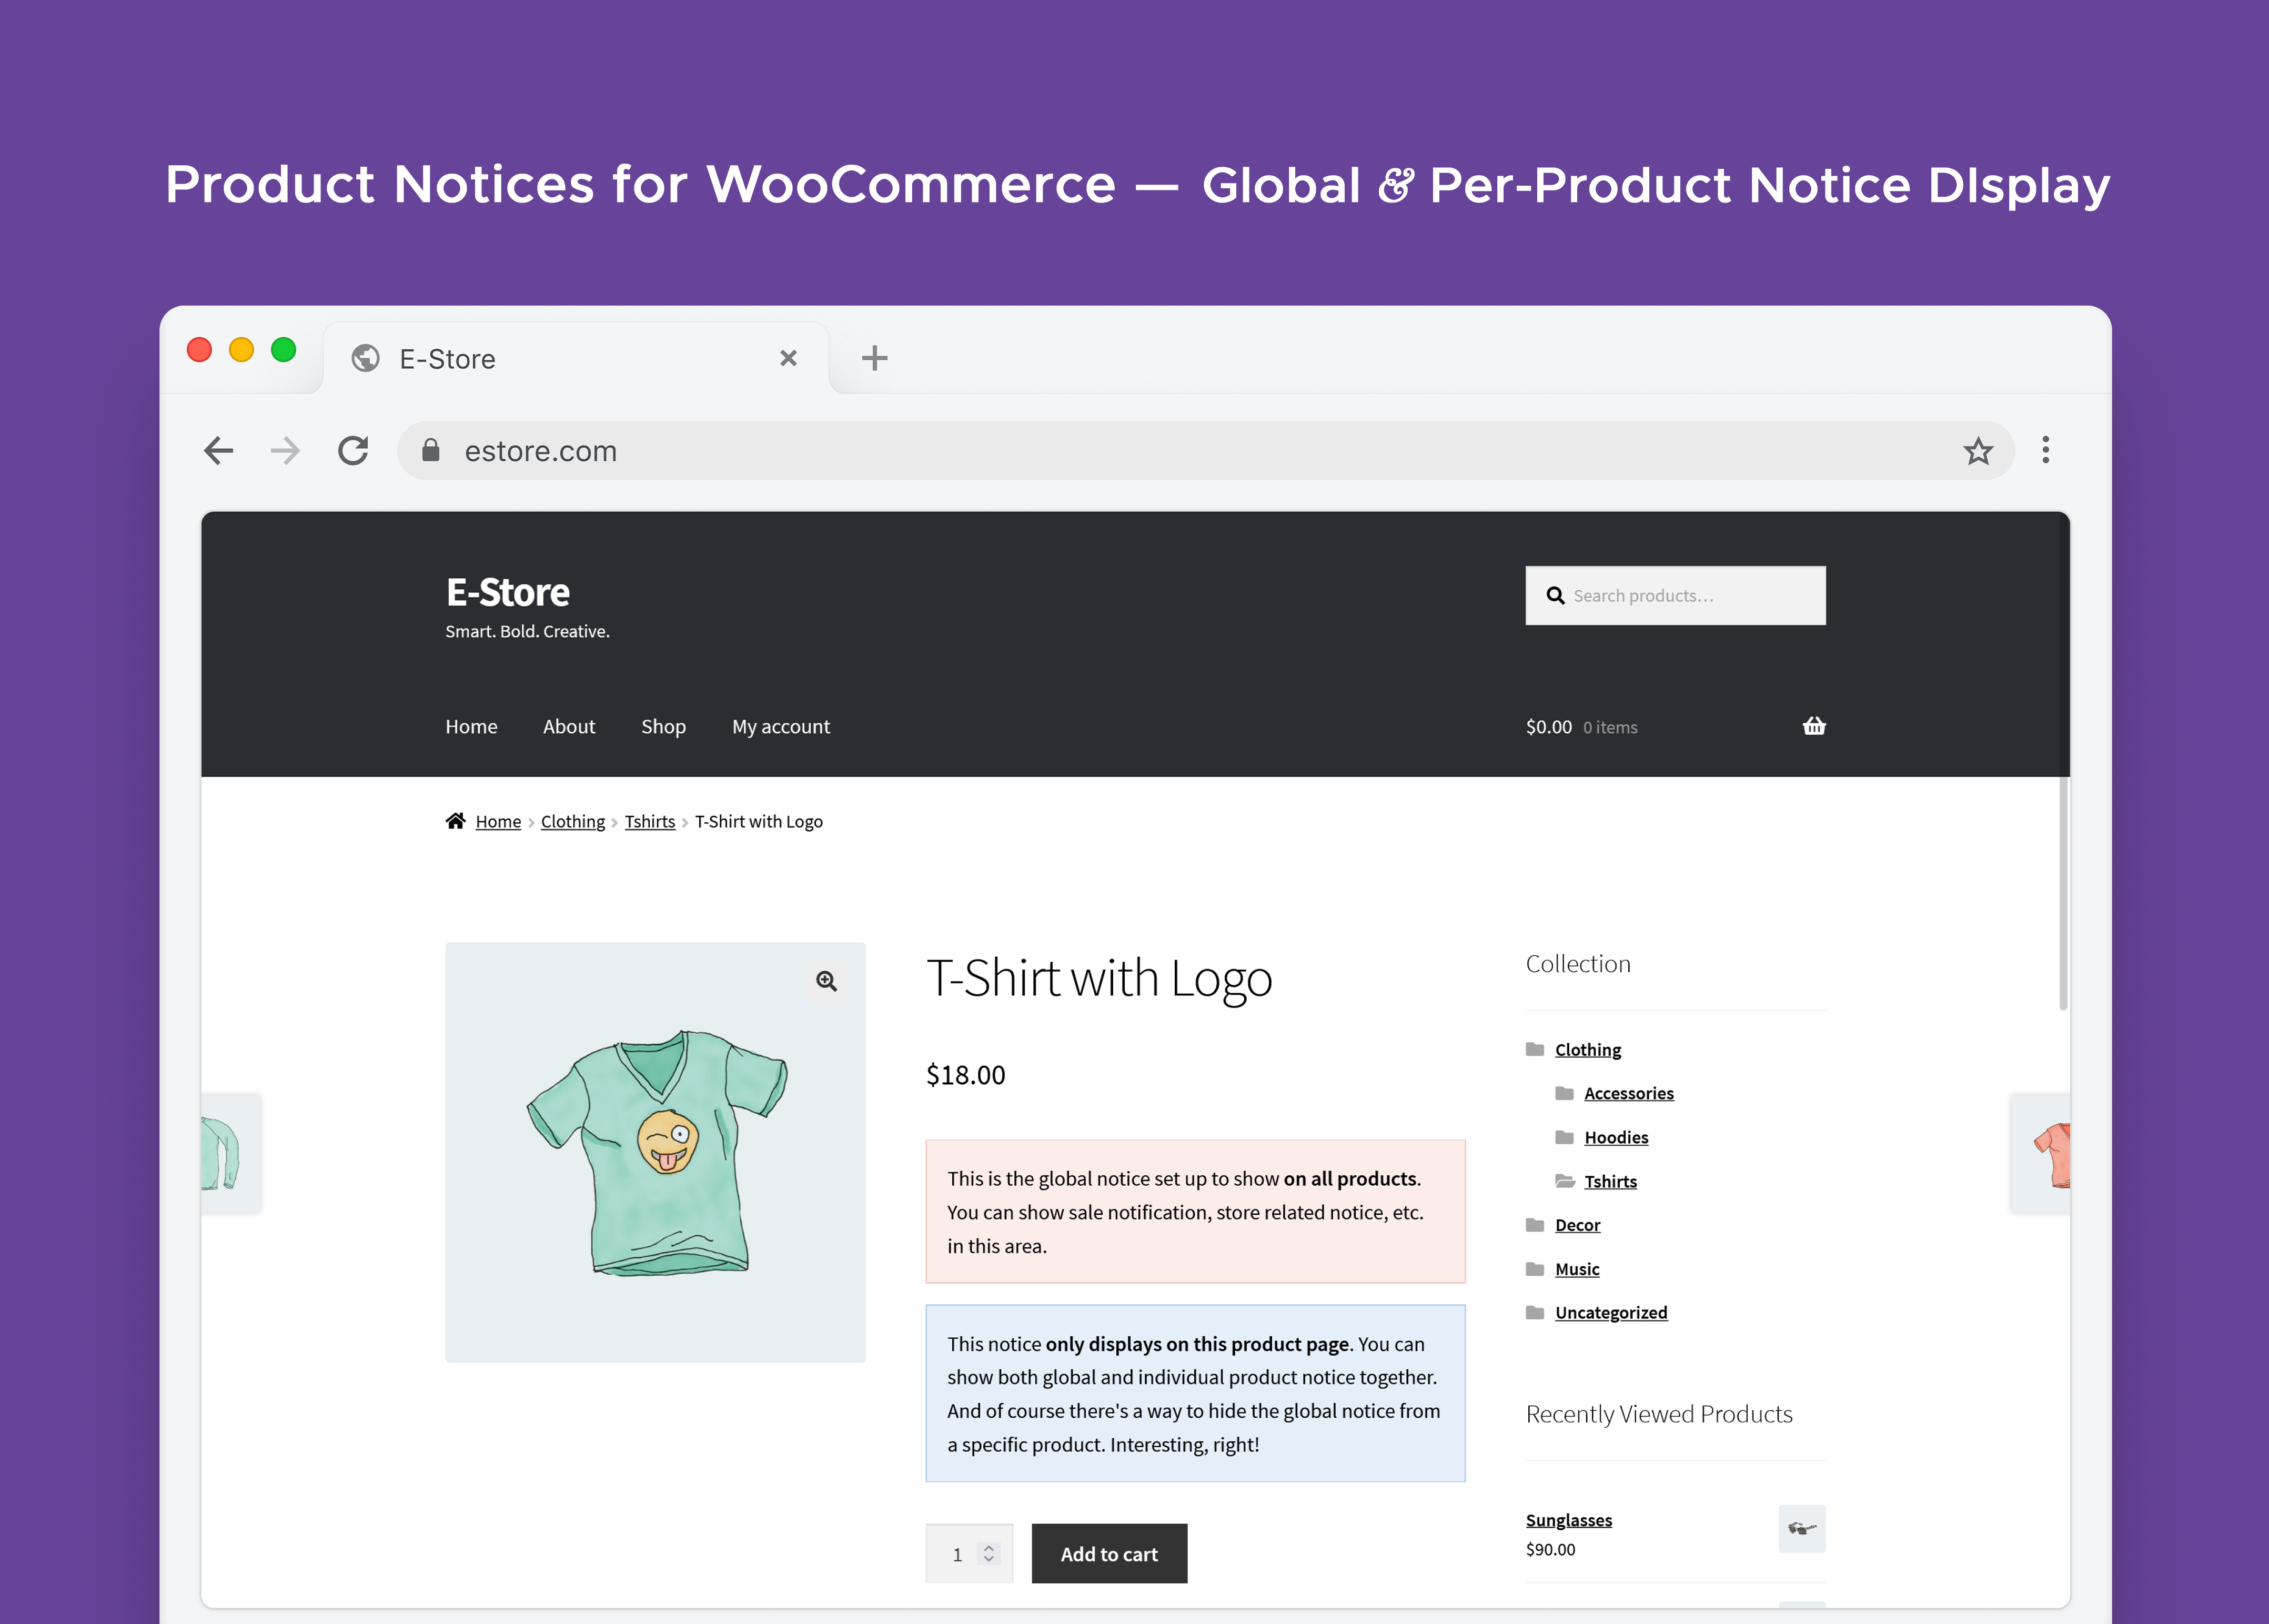 Product Notices for WooCommerce - Global & Per-Product Notice Display